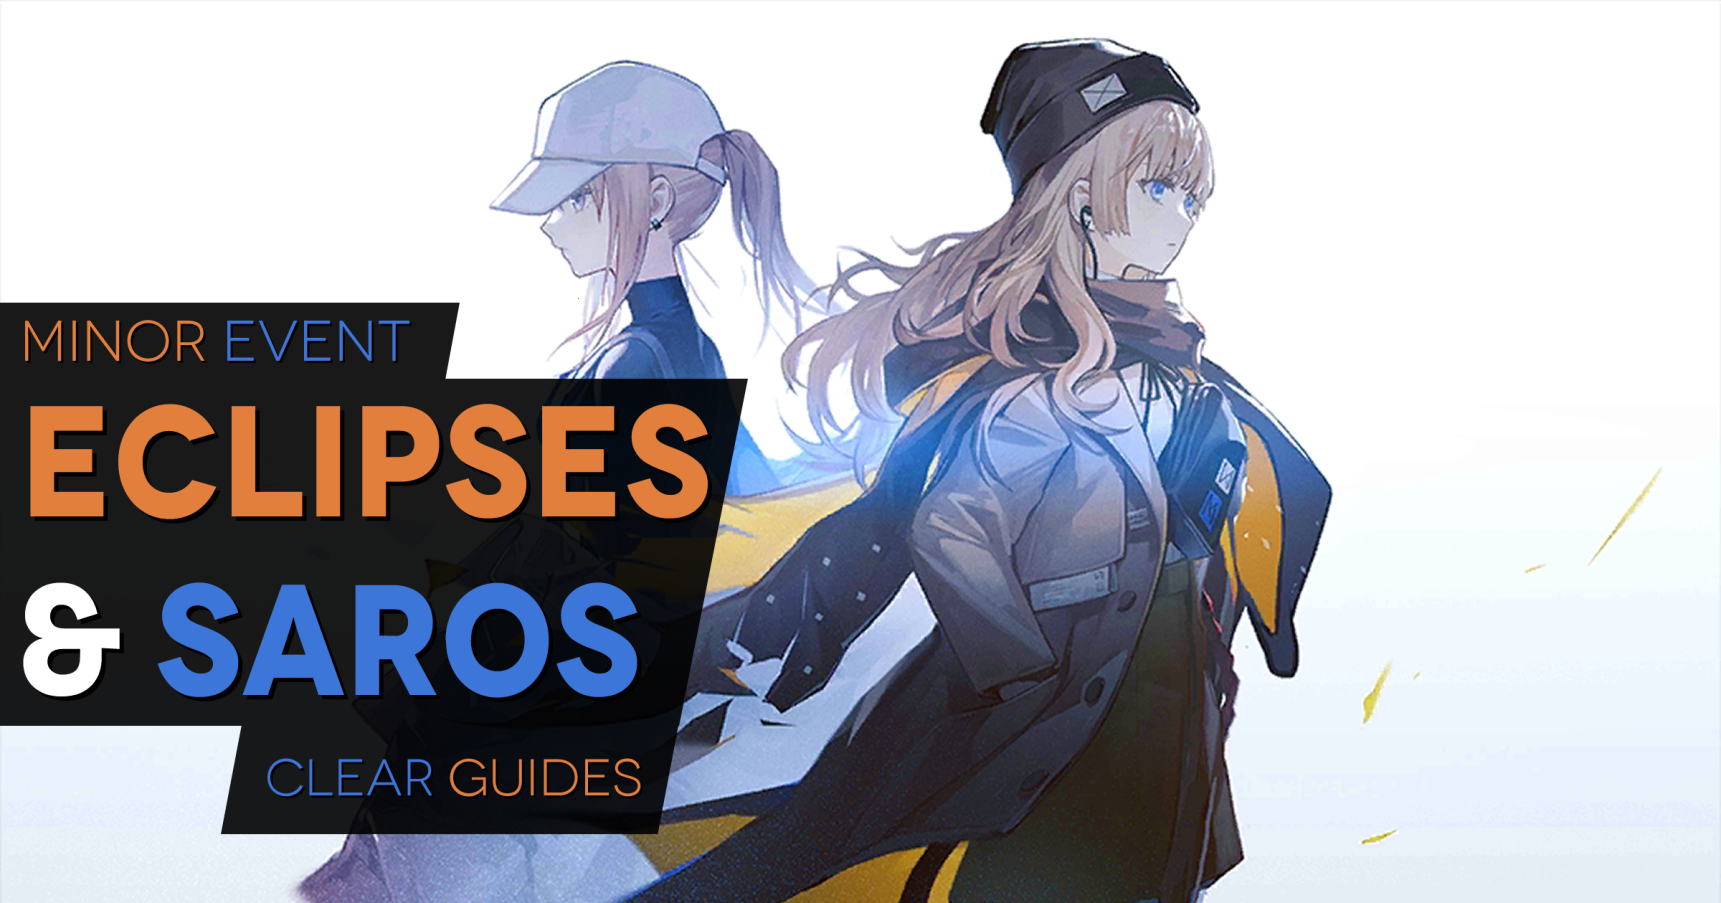 BAnner Image for Eclipses and Saros